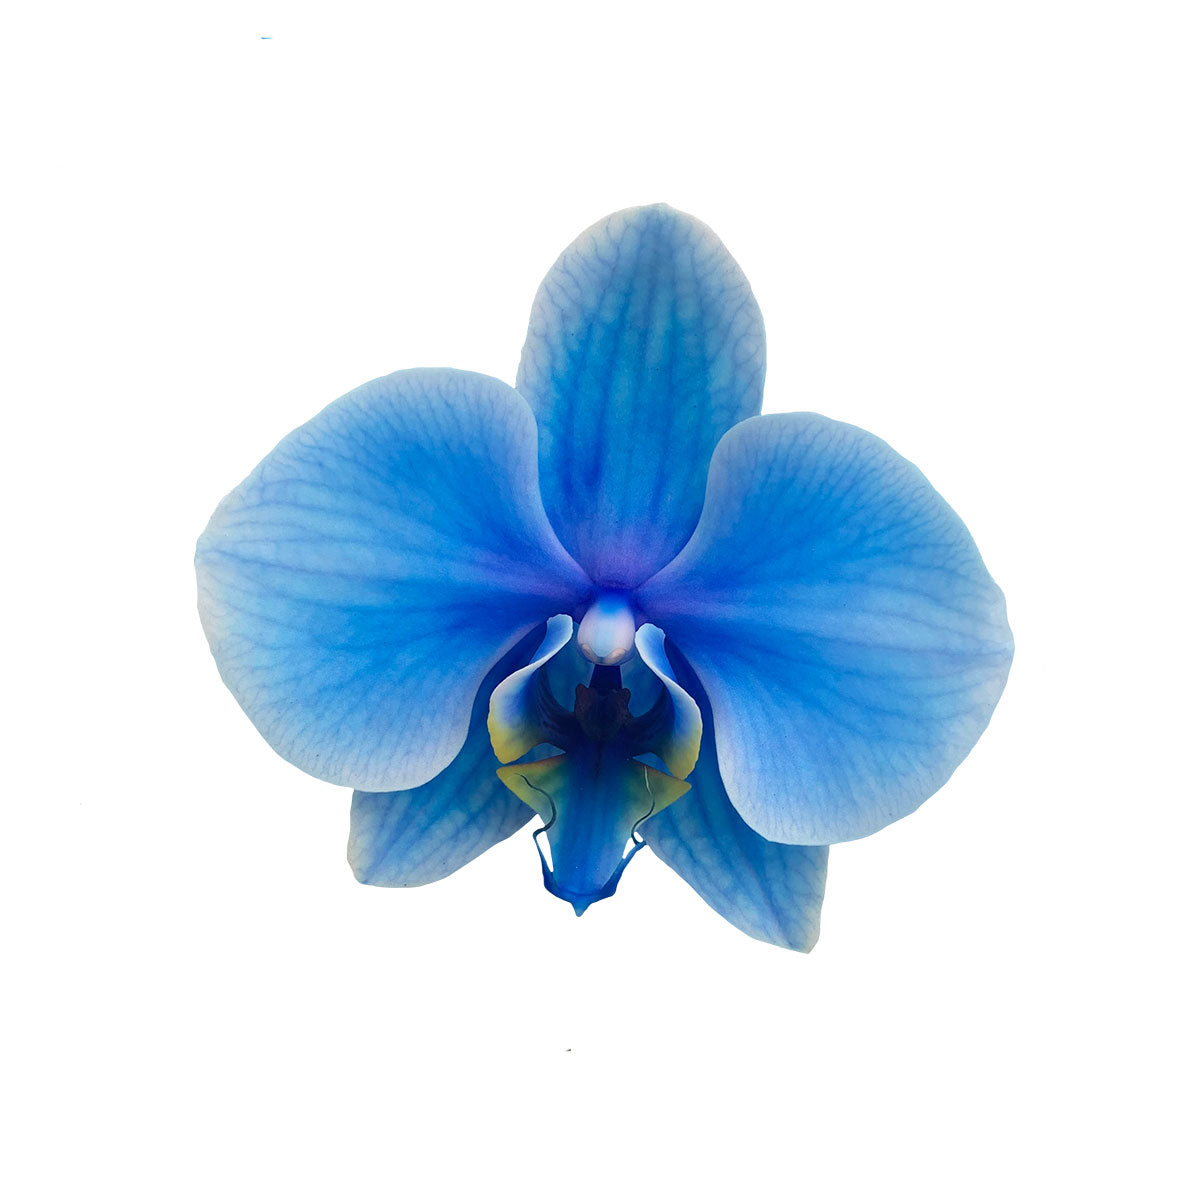 Blue Orchids - Are they Real or Dyed?